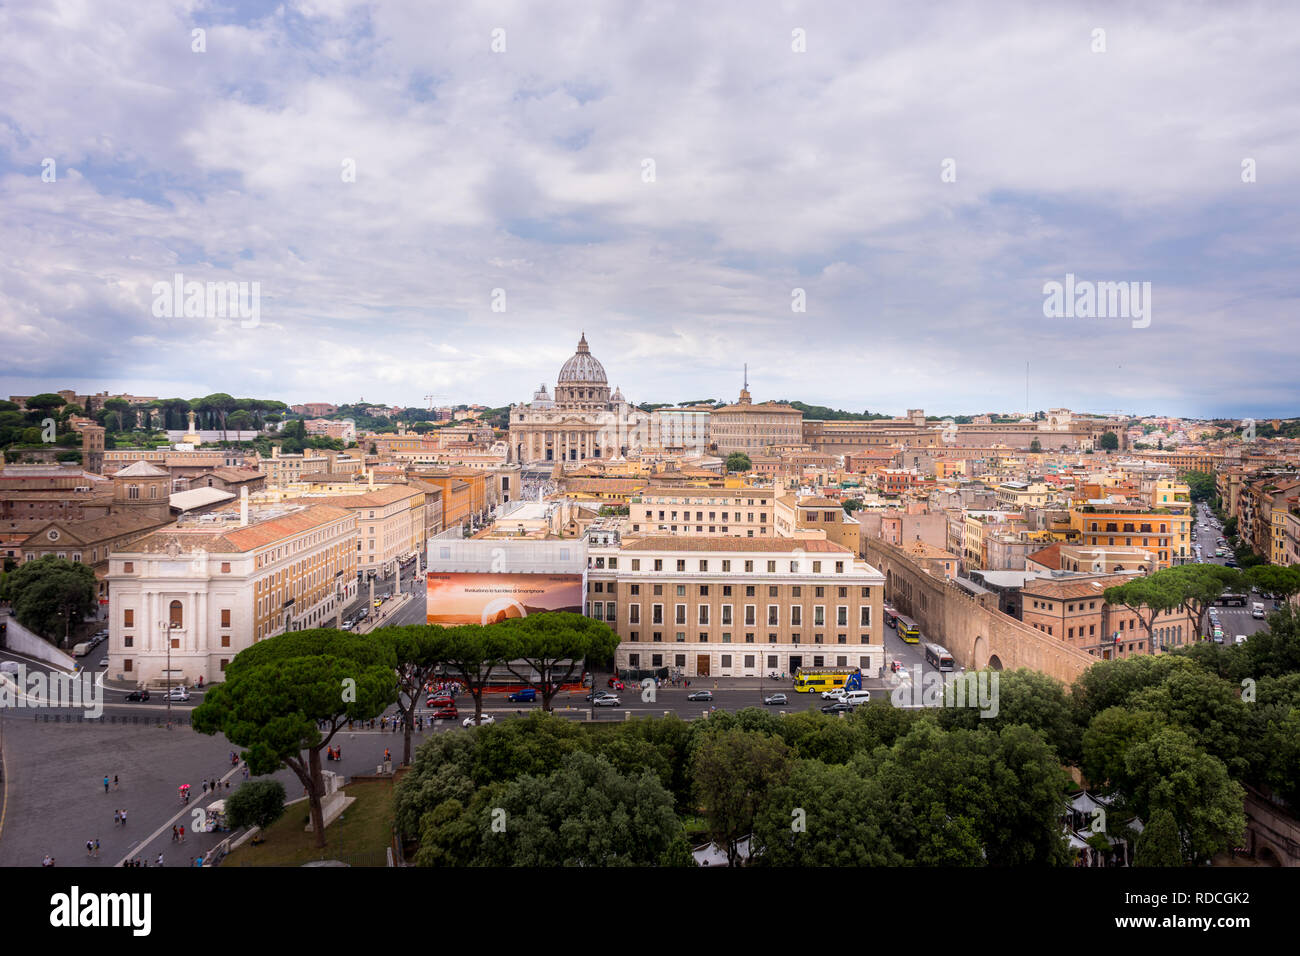 Rome, Italy - 23 June 2018: Saint Peter's church viewed castel sant angelo in Rome, Italy Stock Photo